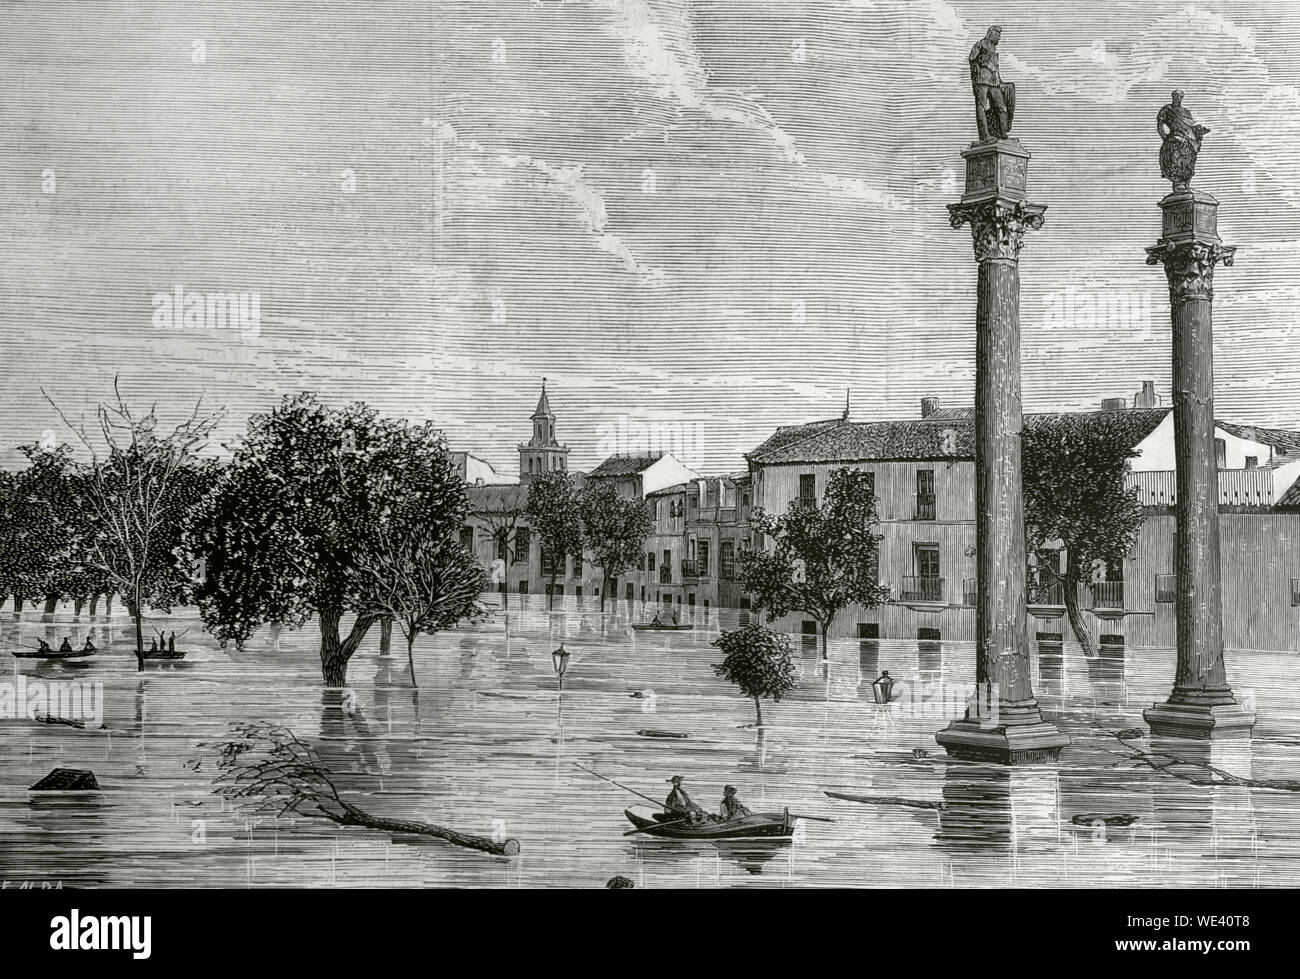 Spain, Andalusia, Seville. Floods in the city. Overflow of the Guadalquivir river. The Alameda de Hercules on the morning of December 9, 1876. Engraving by E. Alba La Ilustracion Española y Americana, December 22, 1876. Stock Photo